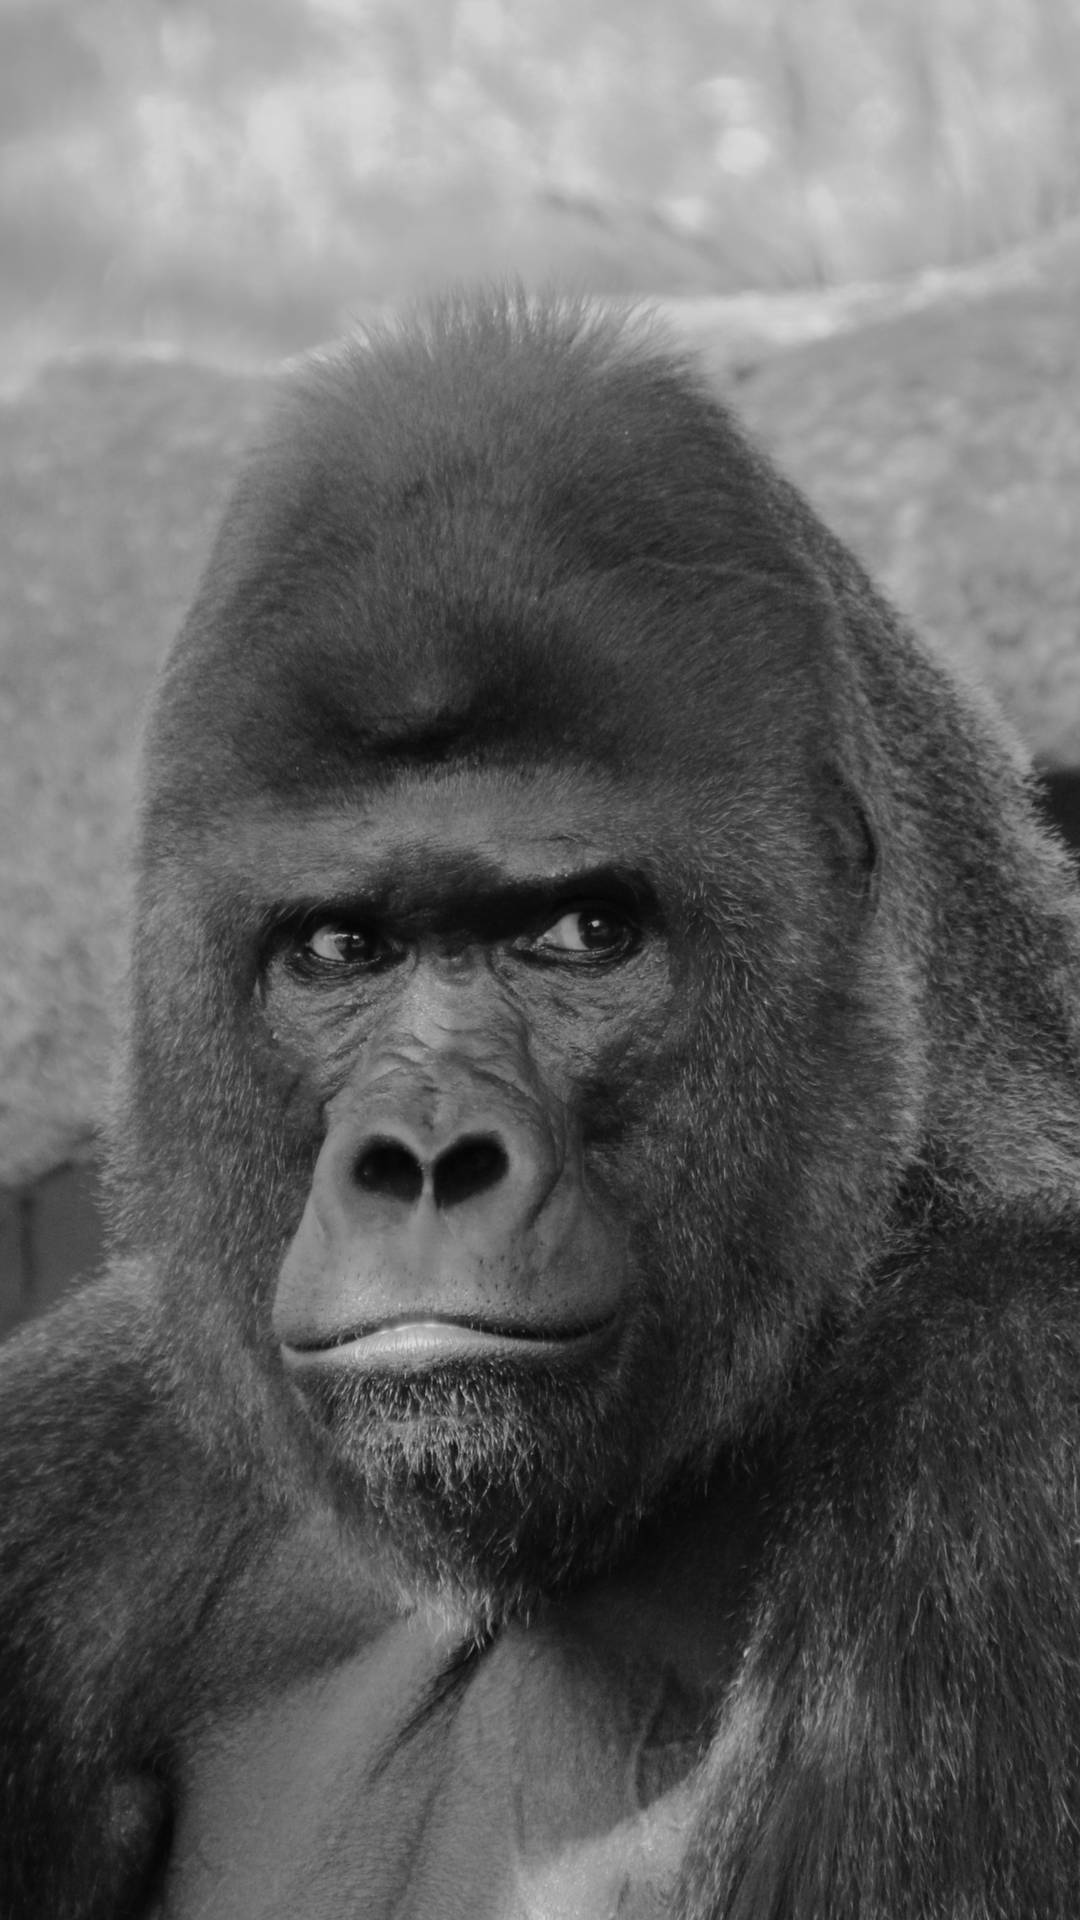 Gorilla 2052X3648 Wallpaper and Background Image